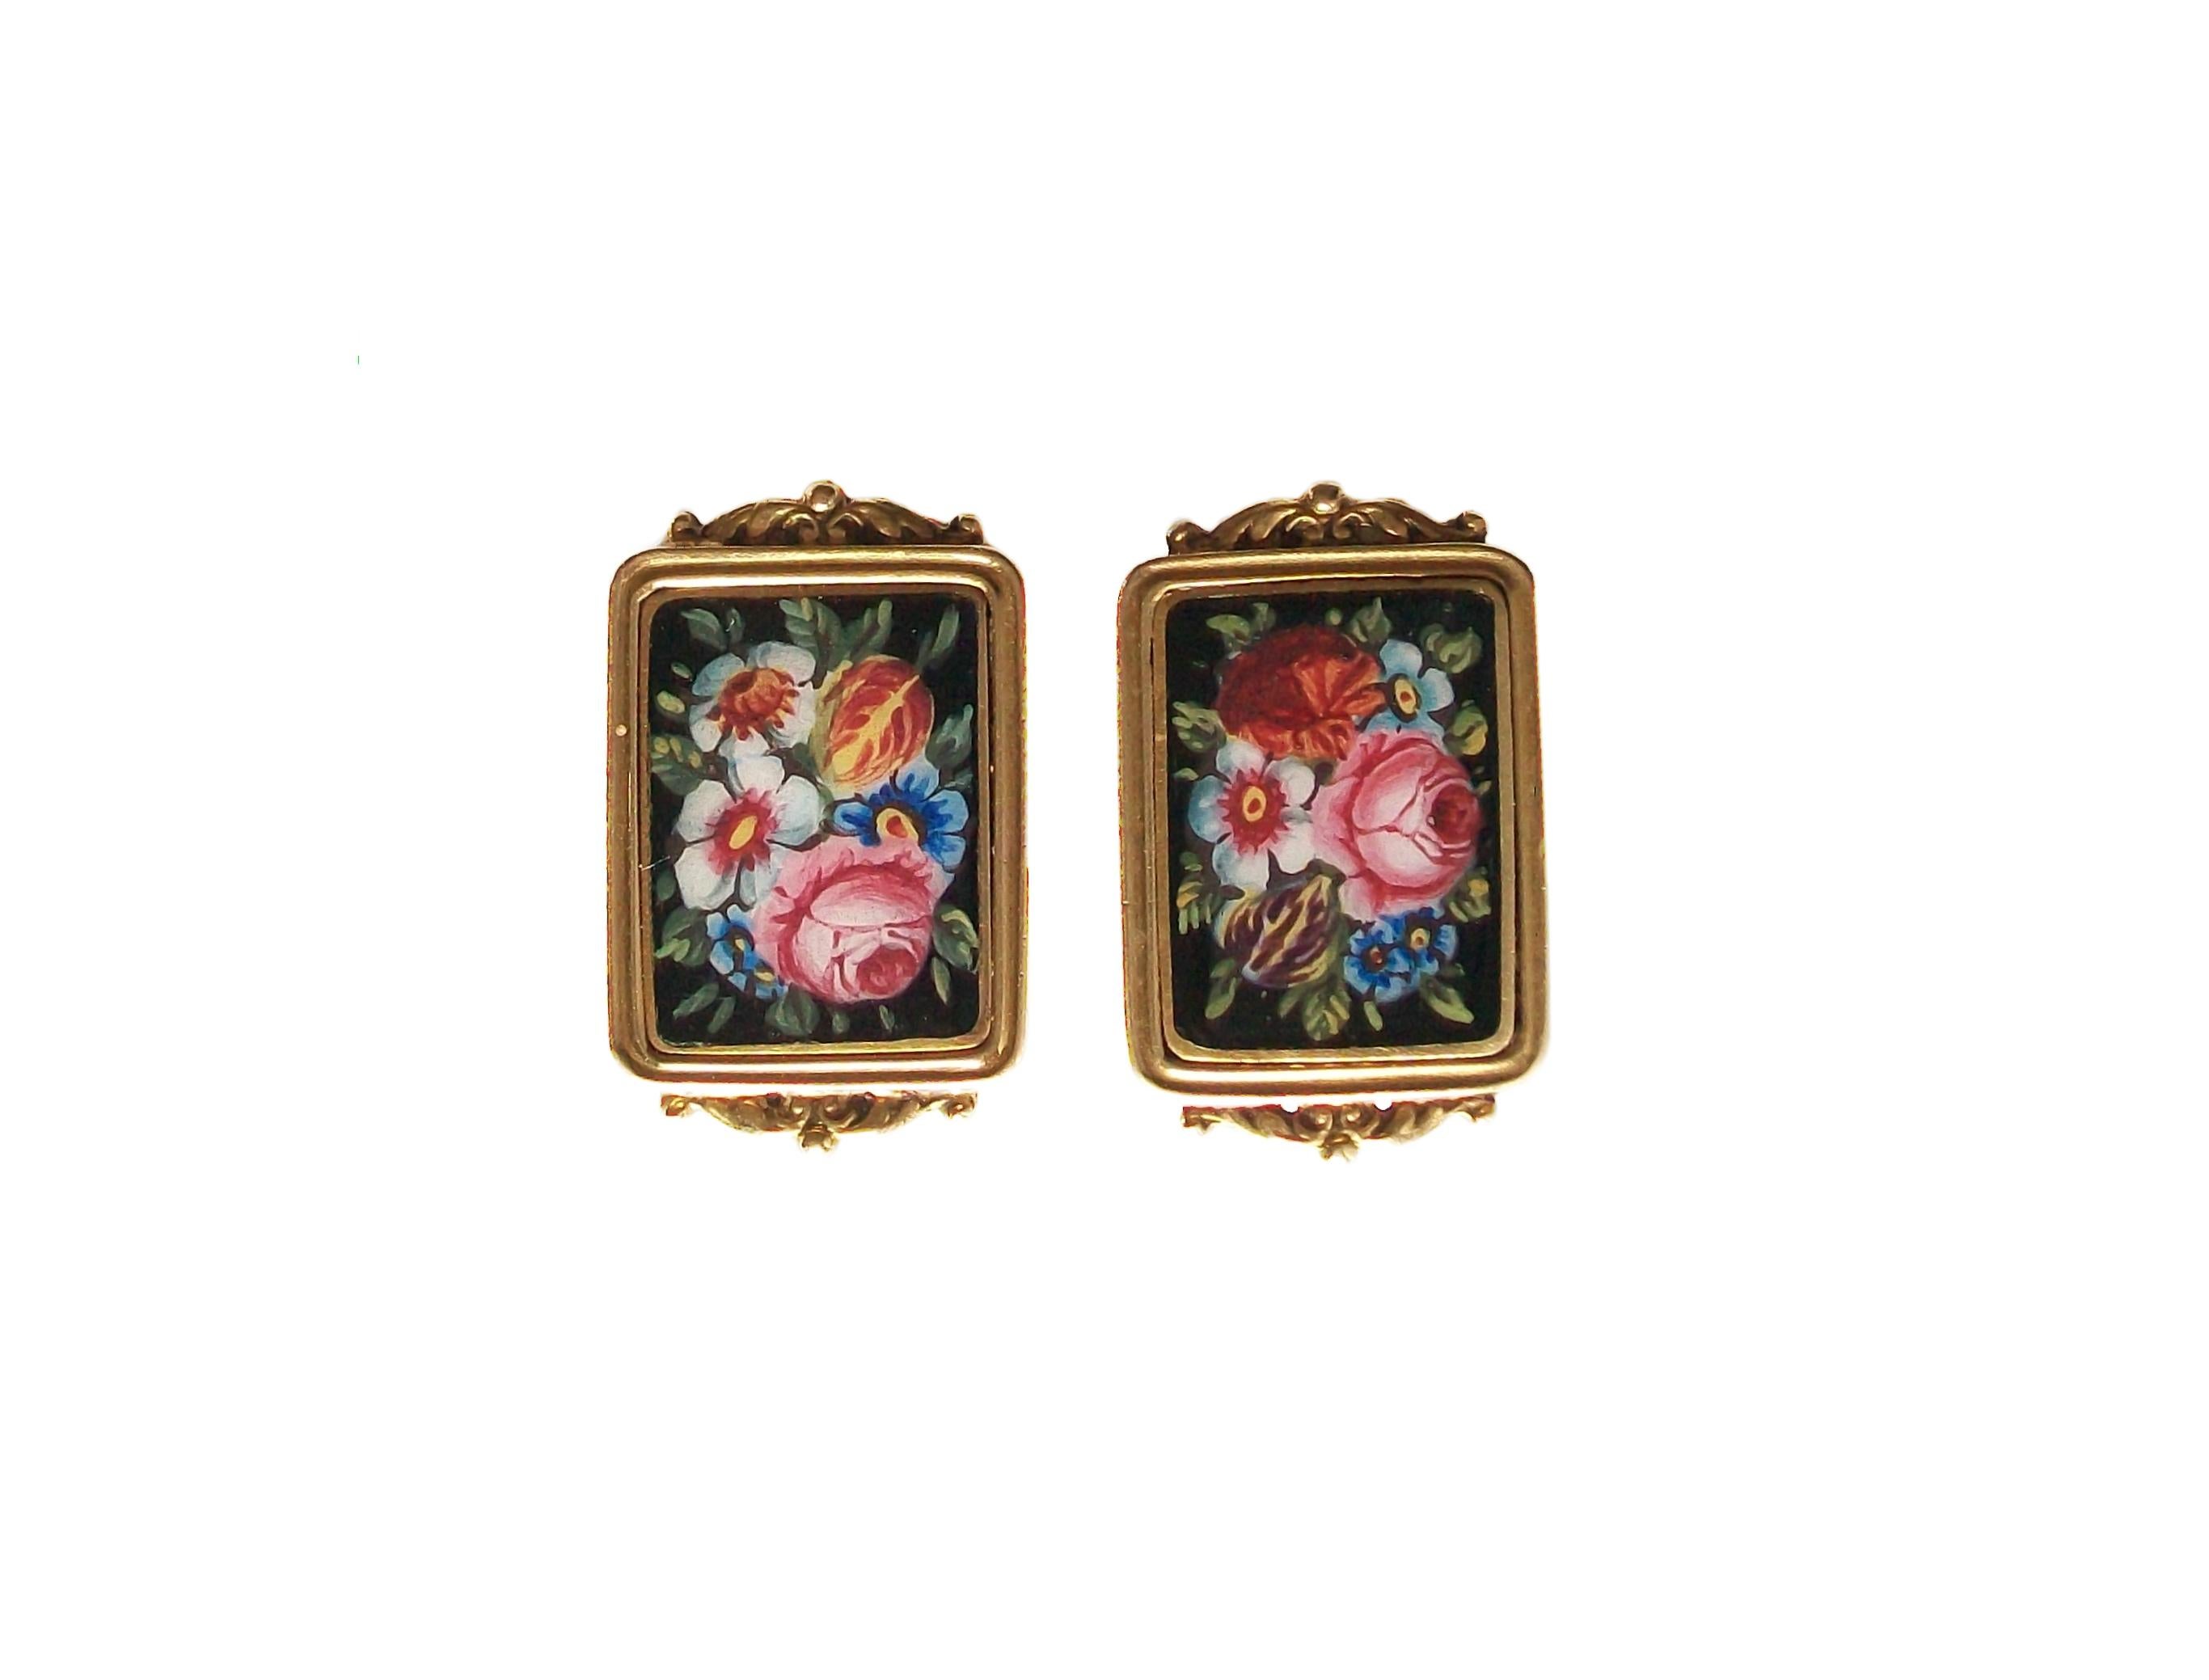 Extraordinary antique enamel and 18K / 750 yellow gold collar studs or buttons - hand painted floral enamels - solid gold frames with leafy scrolls and ball details - finest quality workmanship and detail - completely hand made - French ram's head